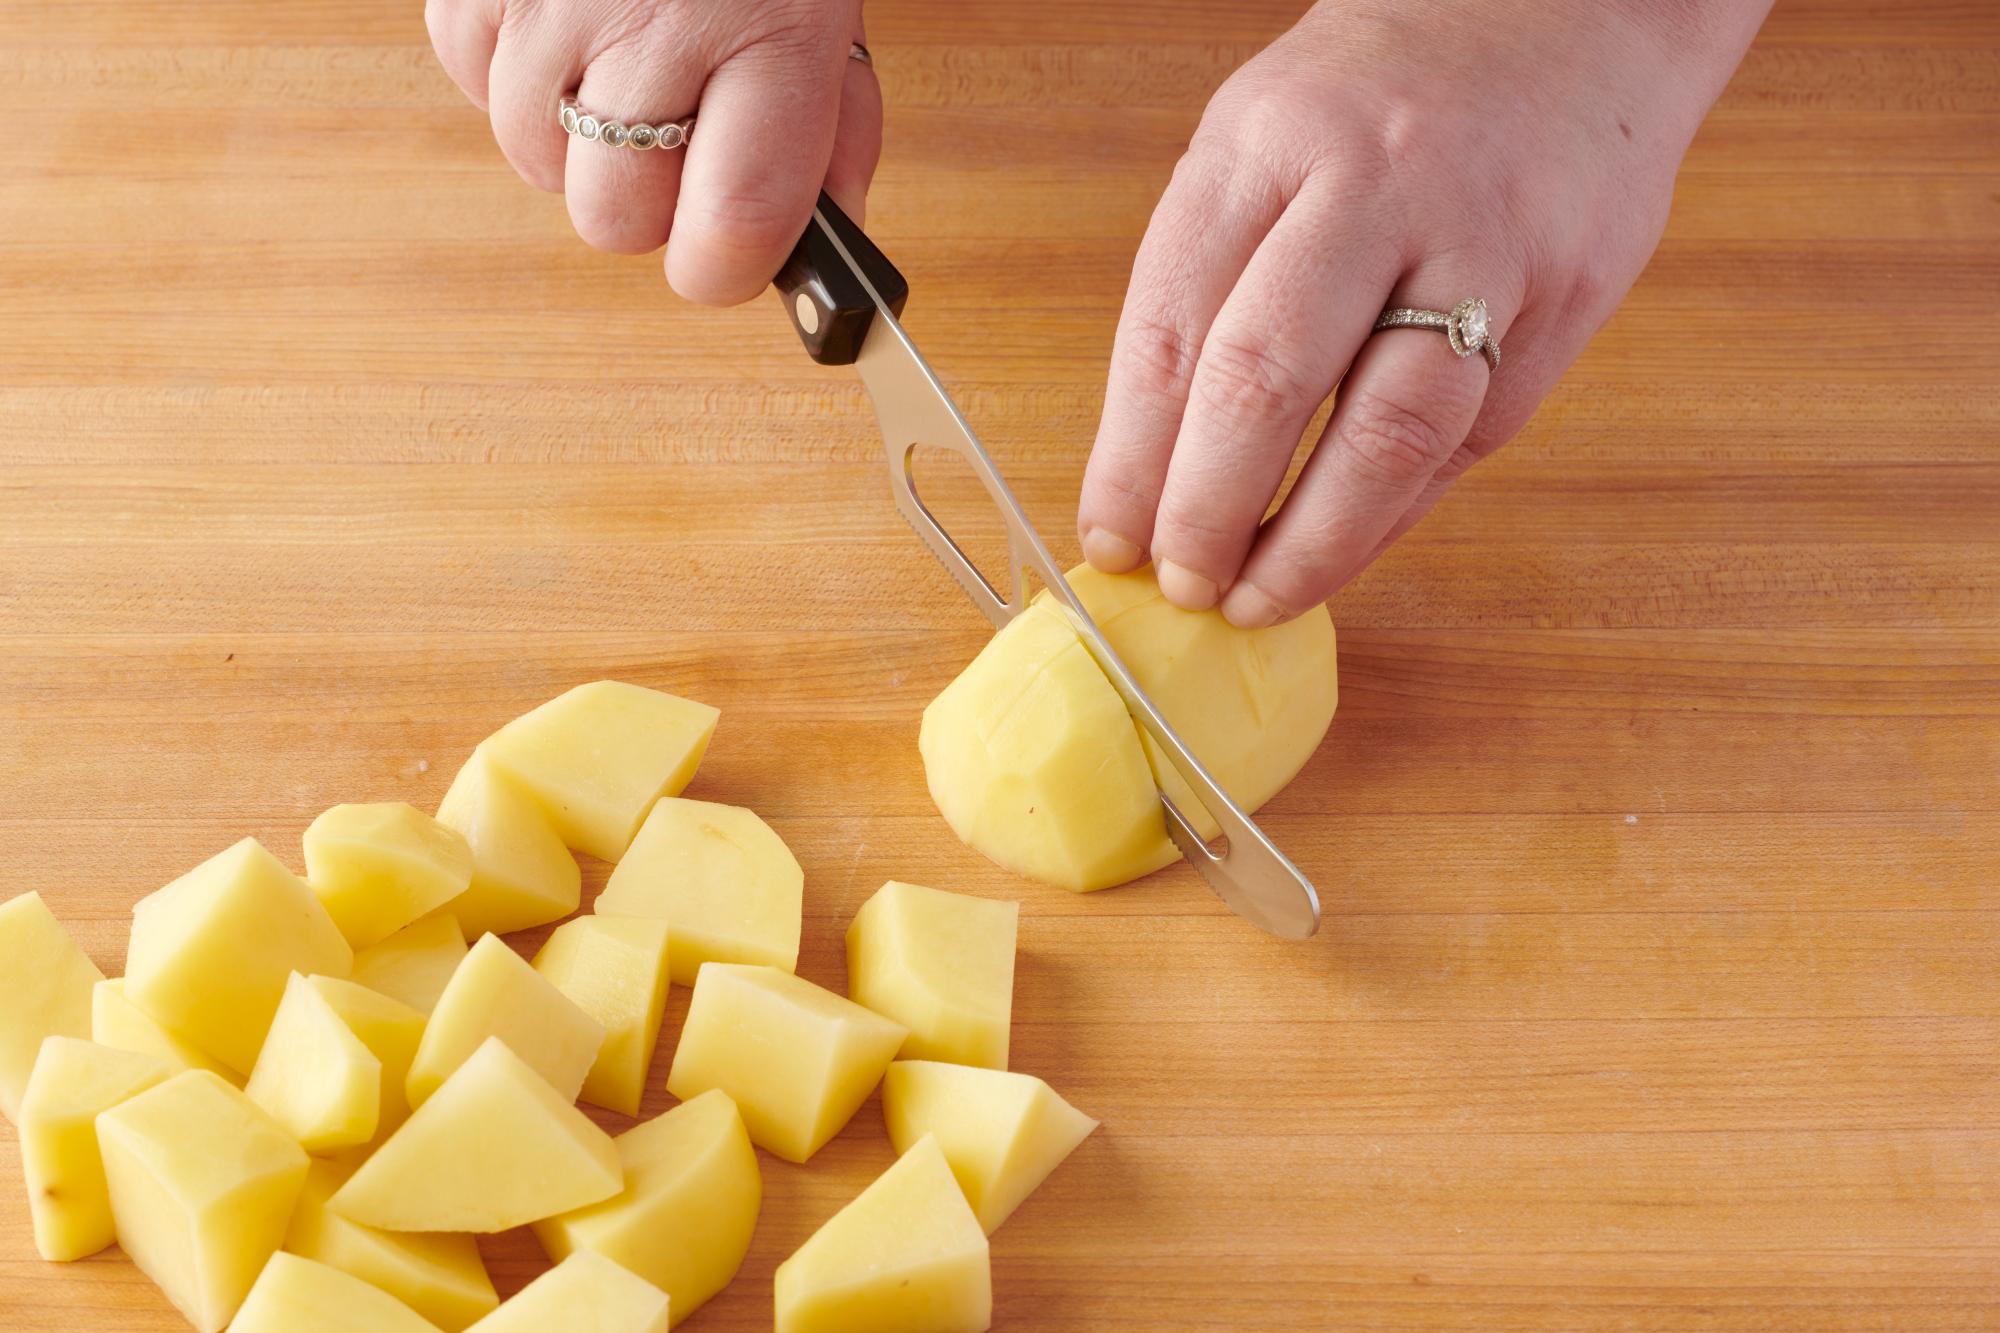 Cutting the potatoes with a Traditional Cheese Knife.